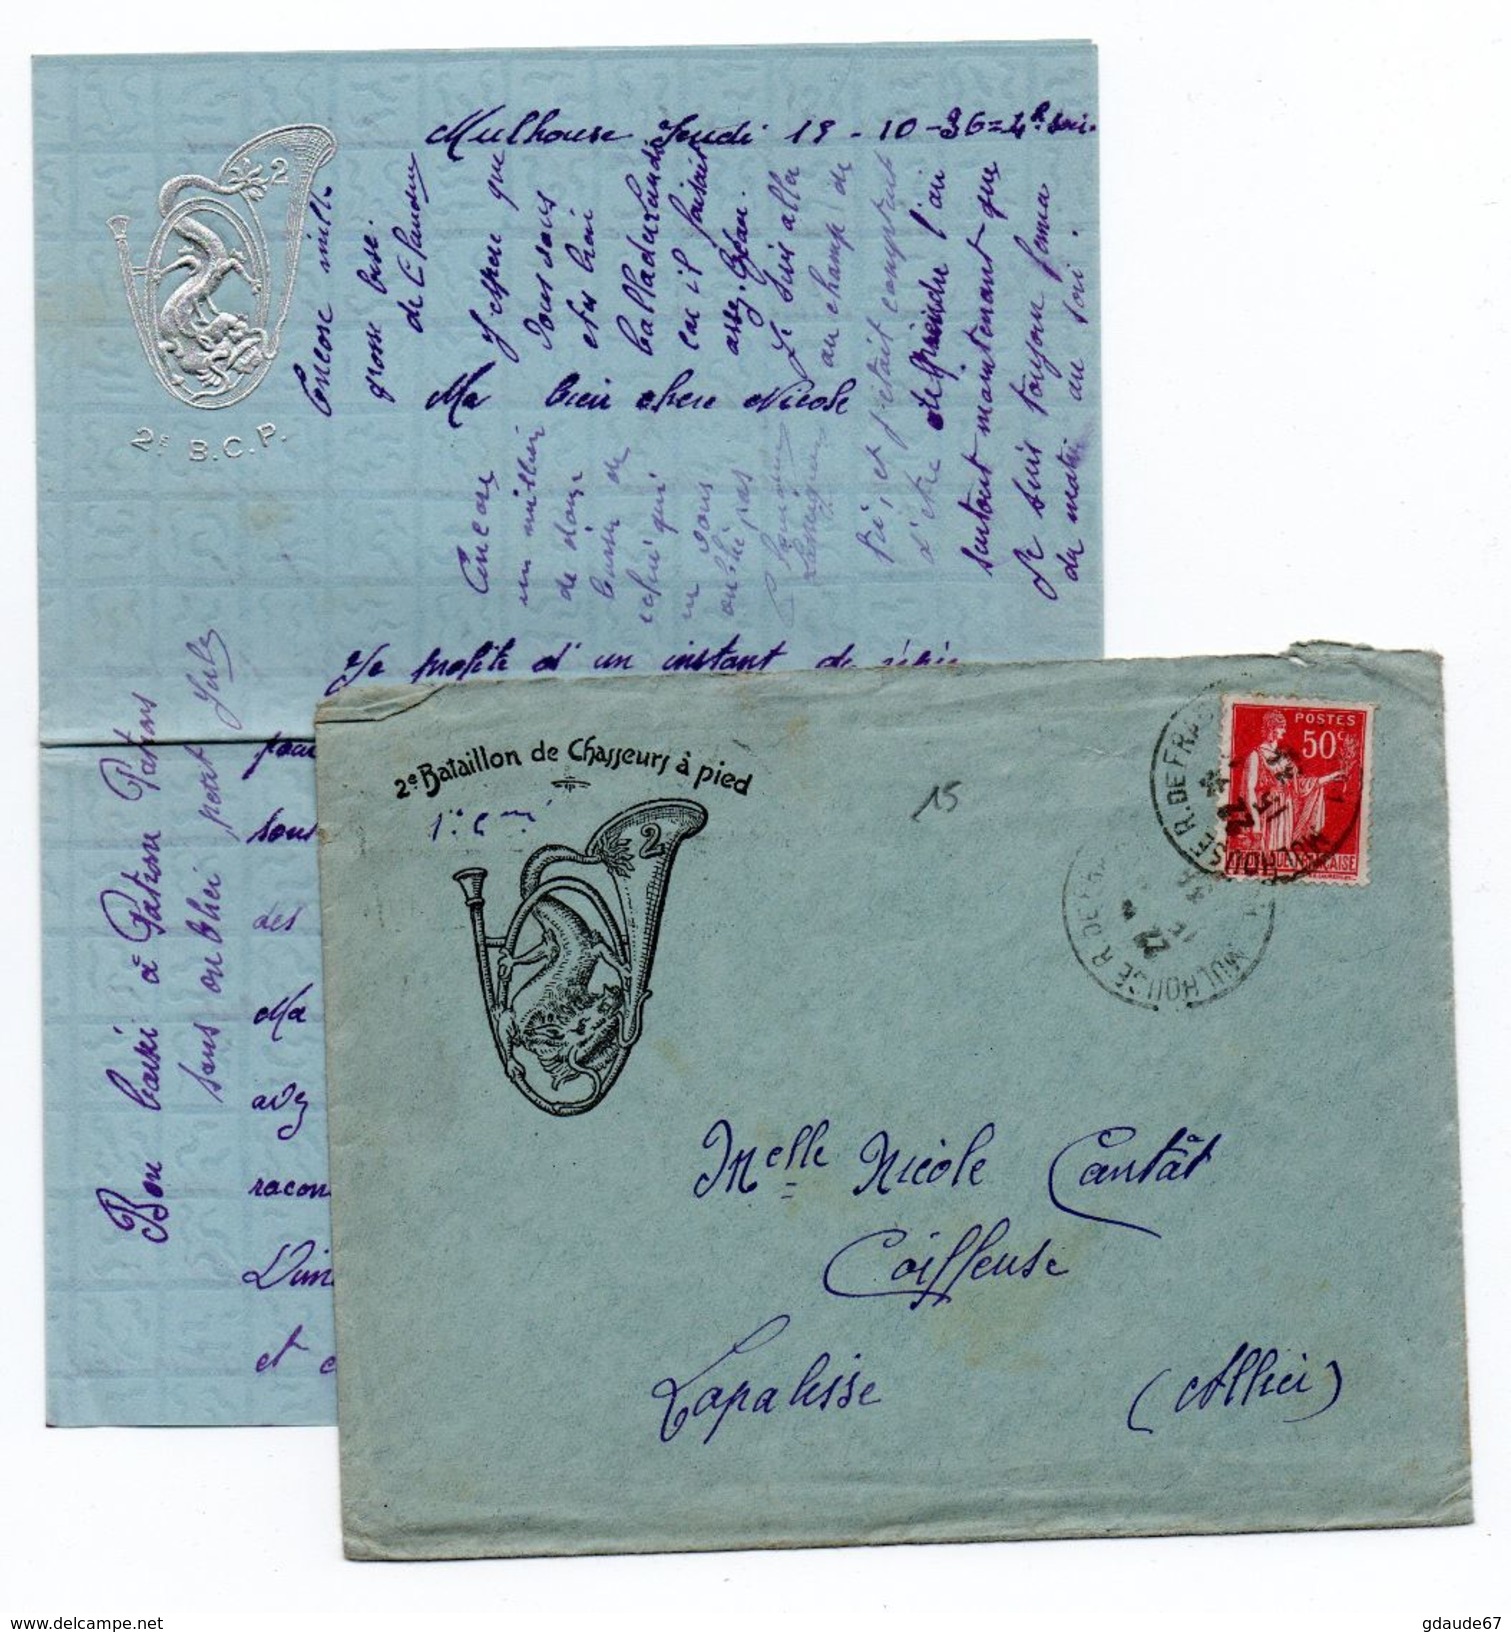 1936 - ENVELOPPE (+ CORRESPONDANCE ILLUSTREE) Du 2° BATAILLON DE CHASSEURS A PIED De MULHOUSE - TYPE PAIX - Military Postmarks From 1900 (out Of Wars Periods)